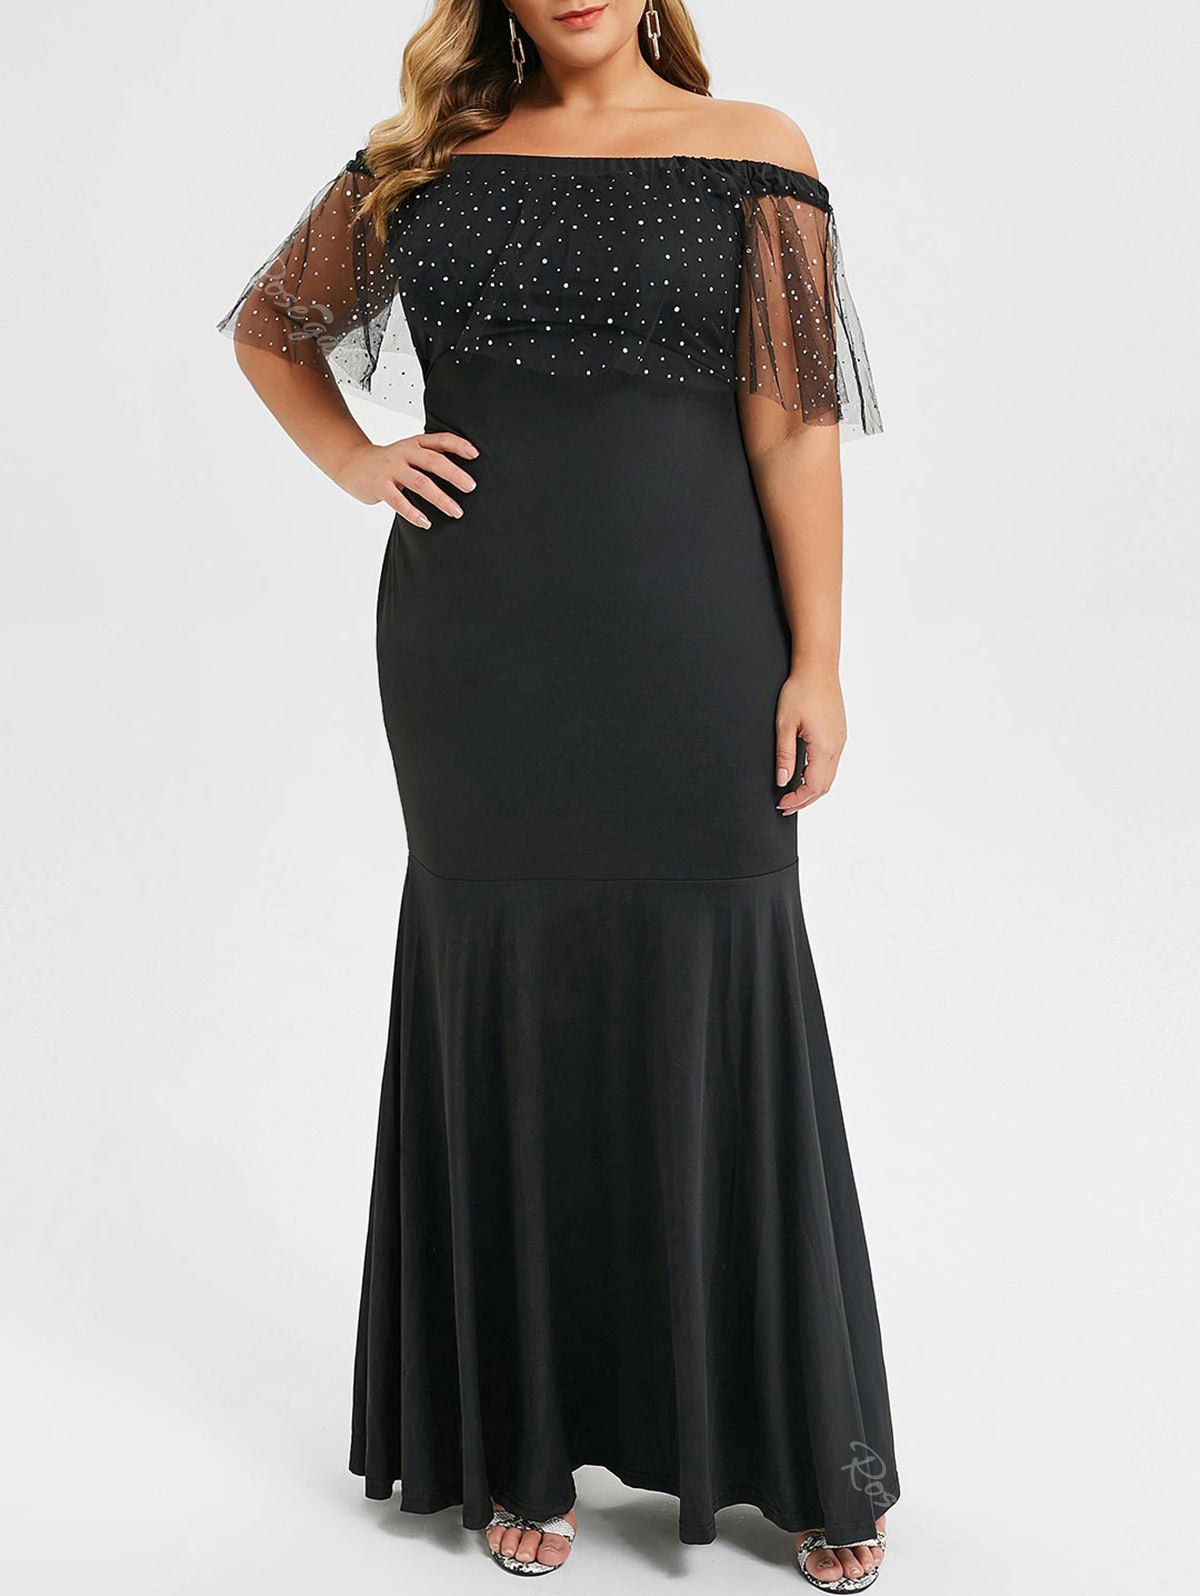 [38% OFF] Plus Size Sequined Tulle Off The Shoulder Mermaid Dress | Rosegal